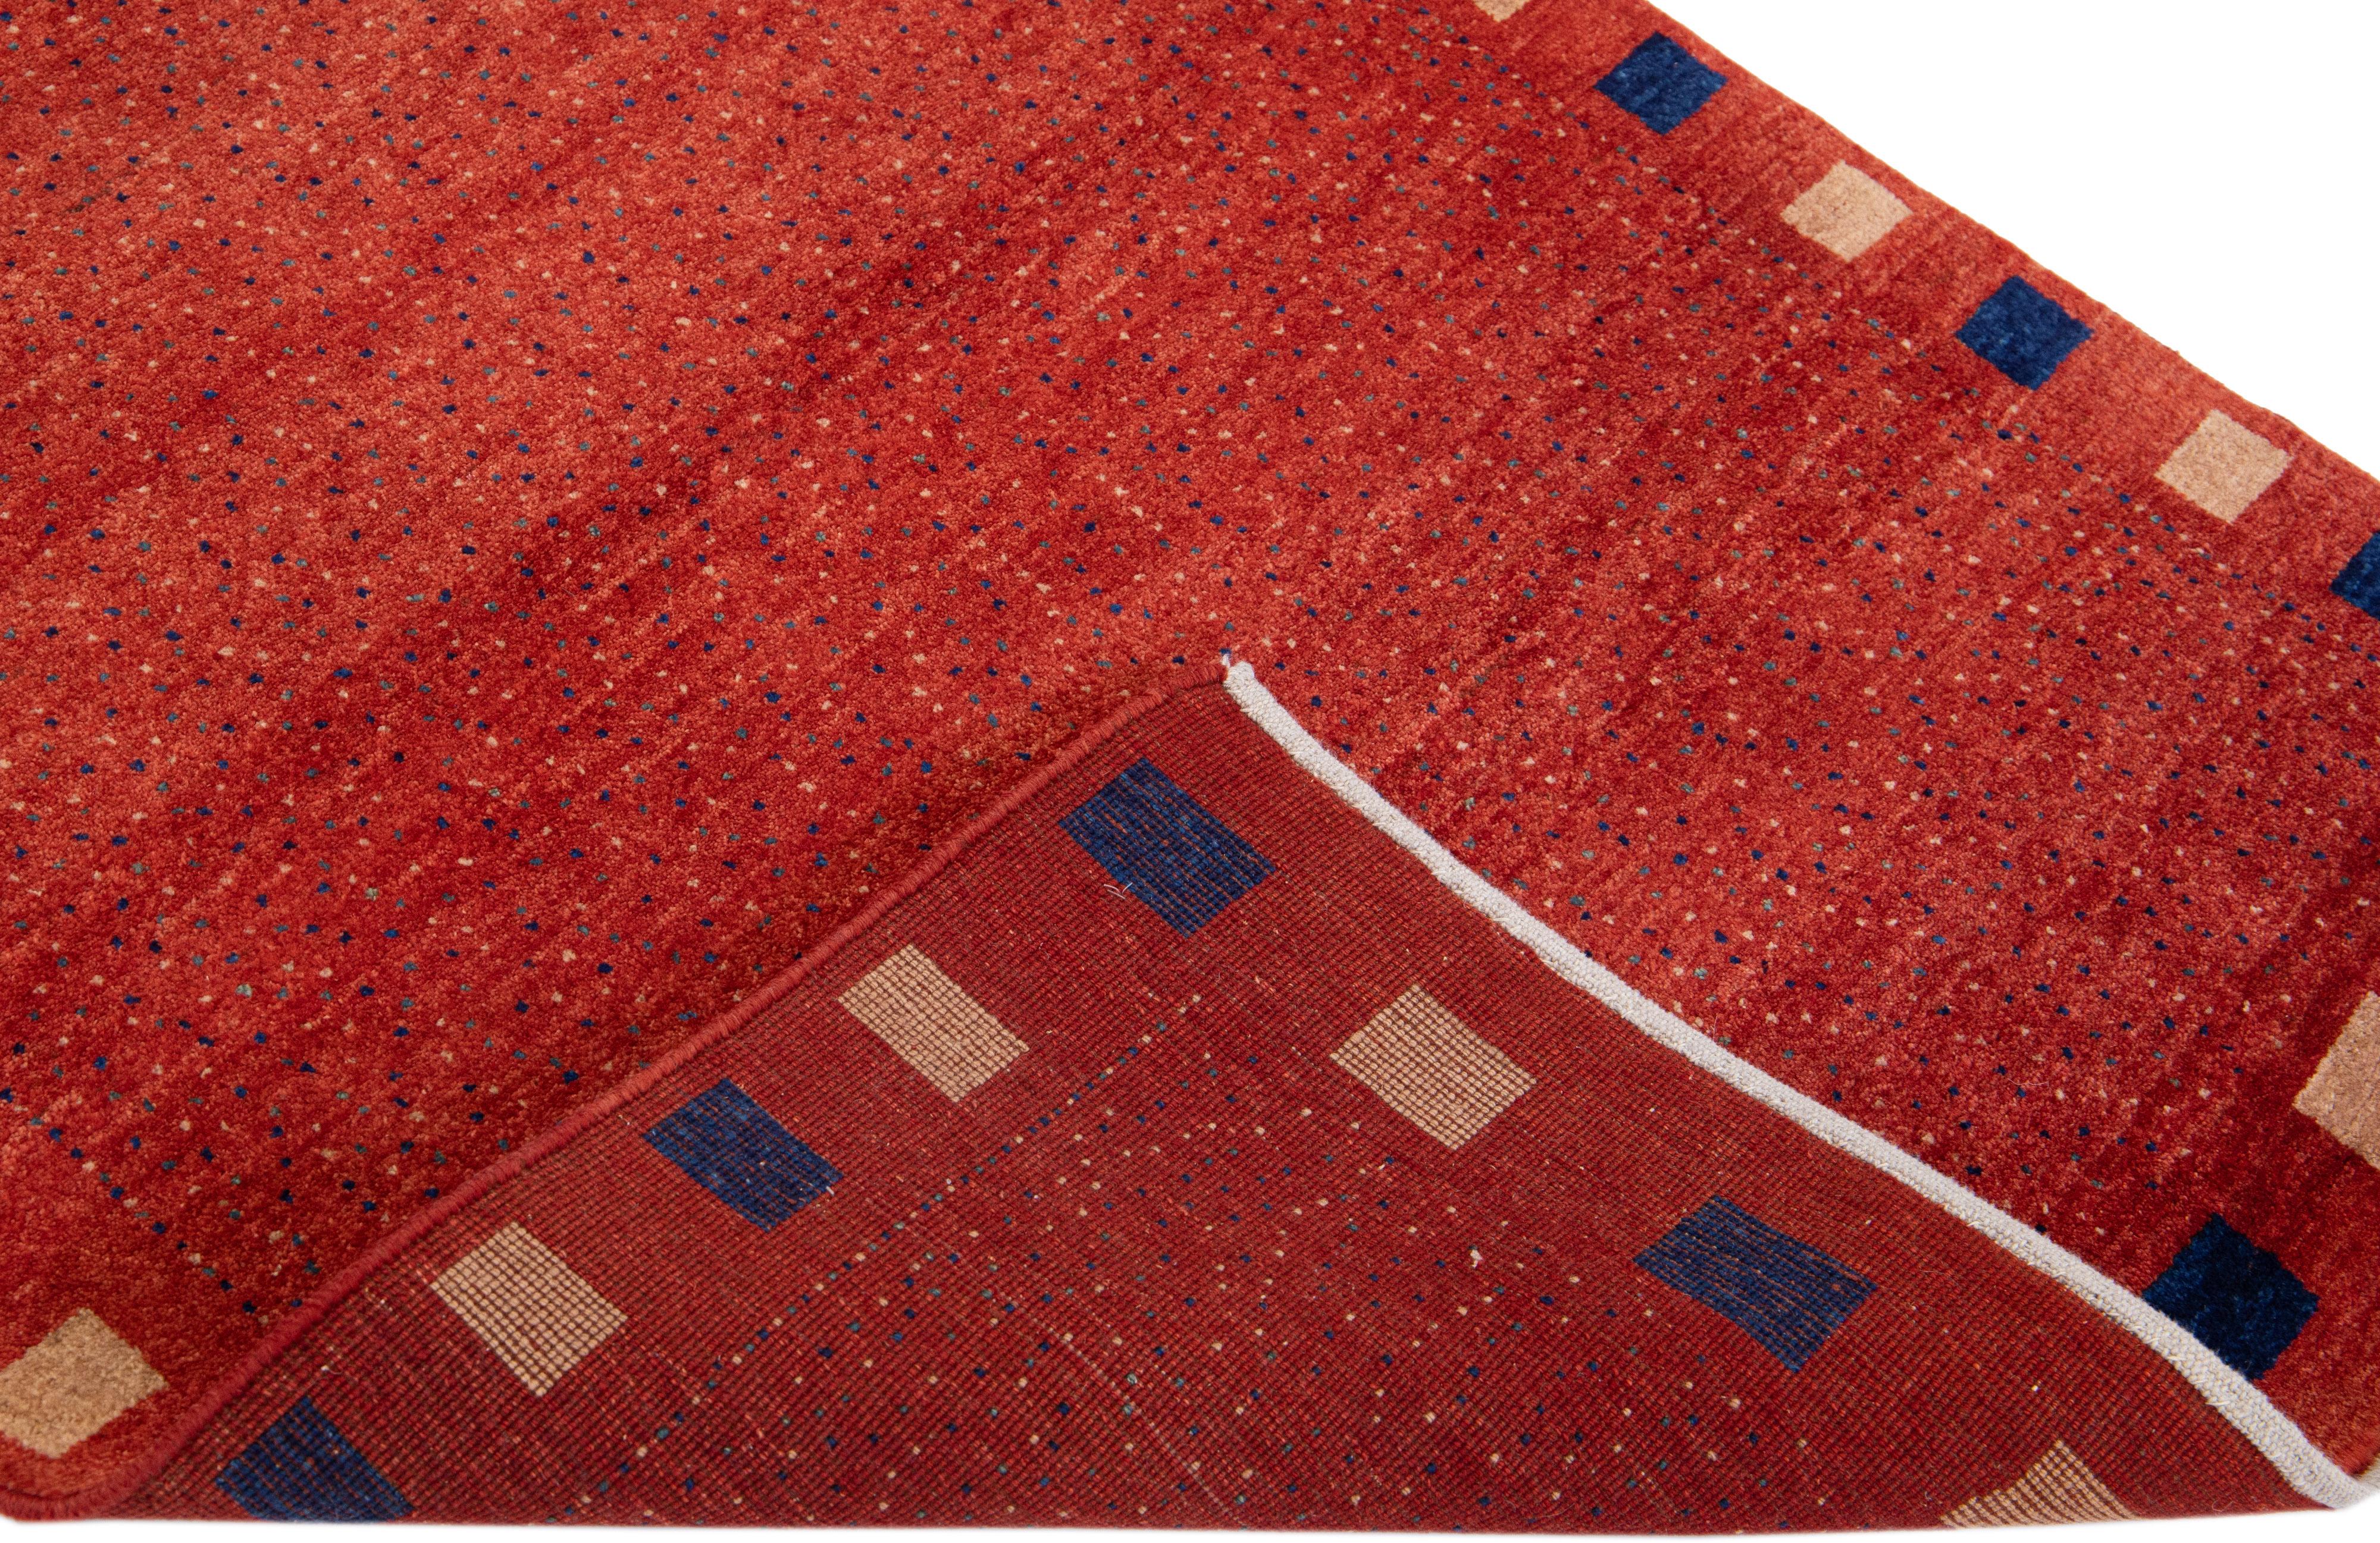 Beautiful modern Gabbeh hand-knotted wool rug with a red field. This Persian rug has beige and blue accents in a gorgeously minimalist design.

This rug measures: 3'5